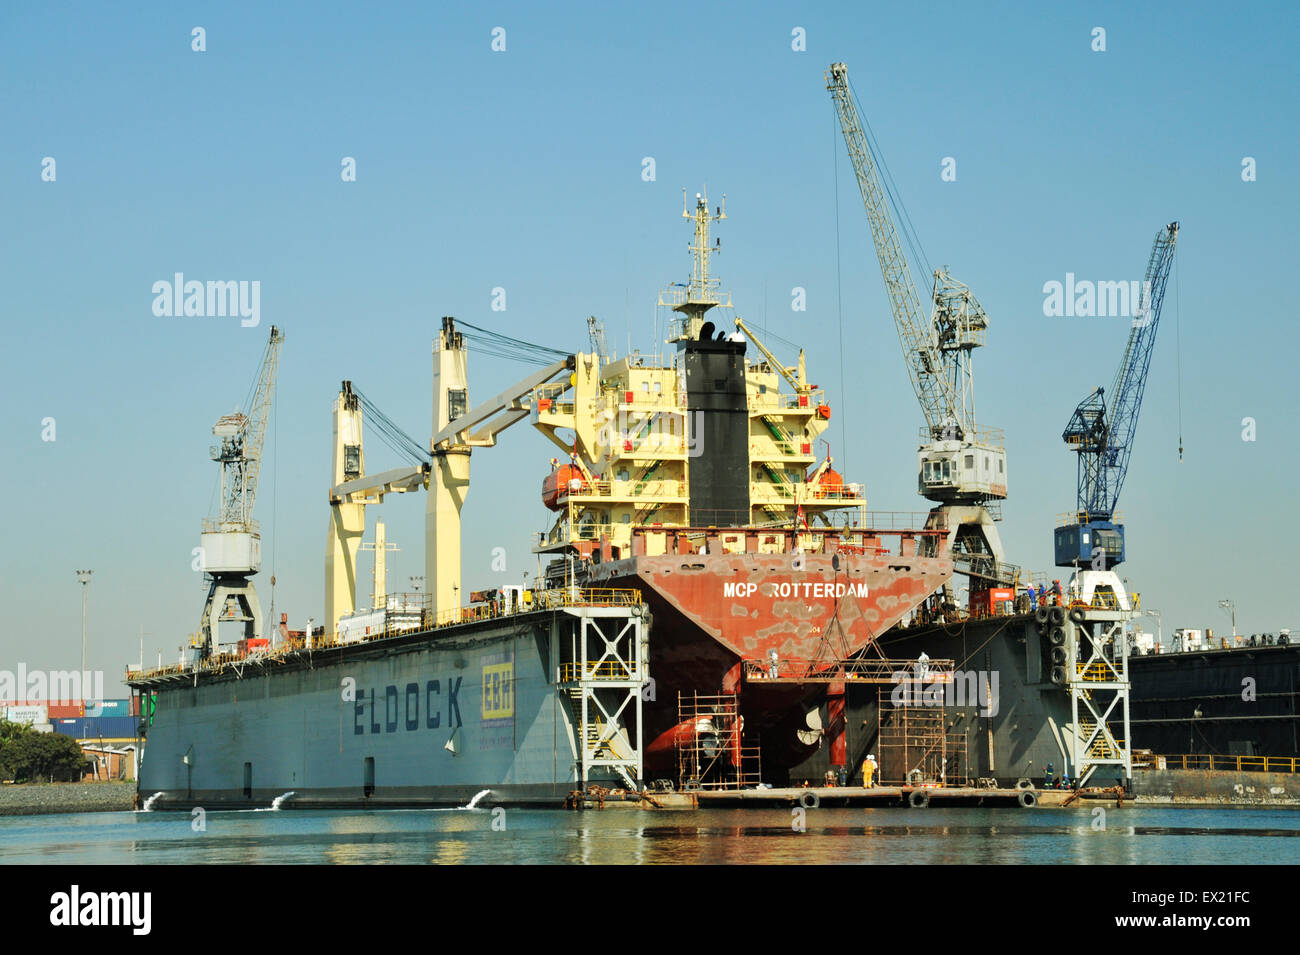 Repair maintenance and painting MCP Rotterdam on EBH floating dry dock Durban South Africa Stock Photo